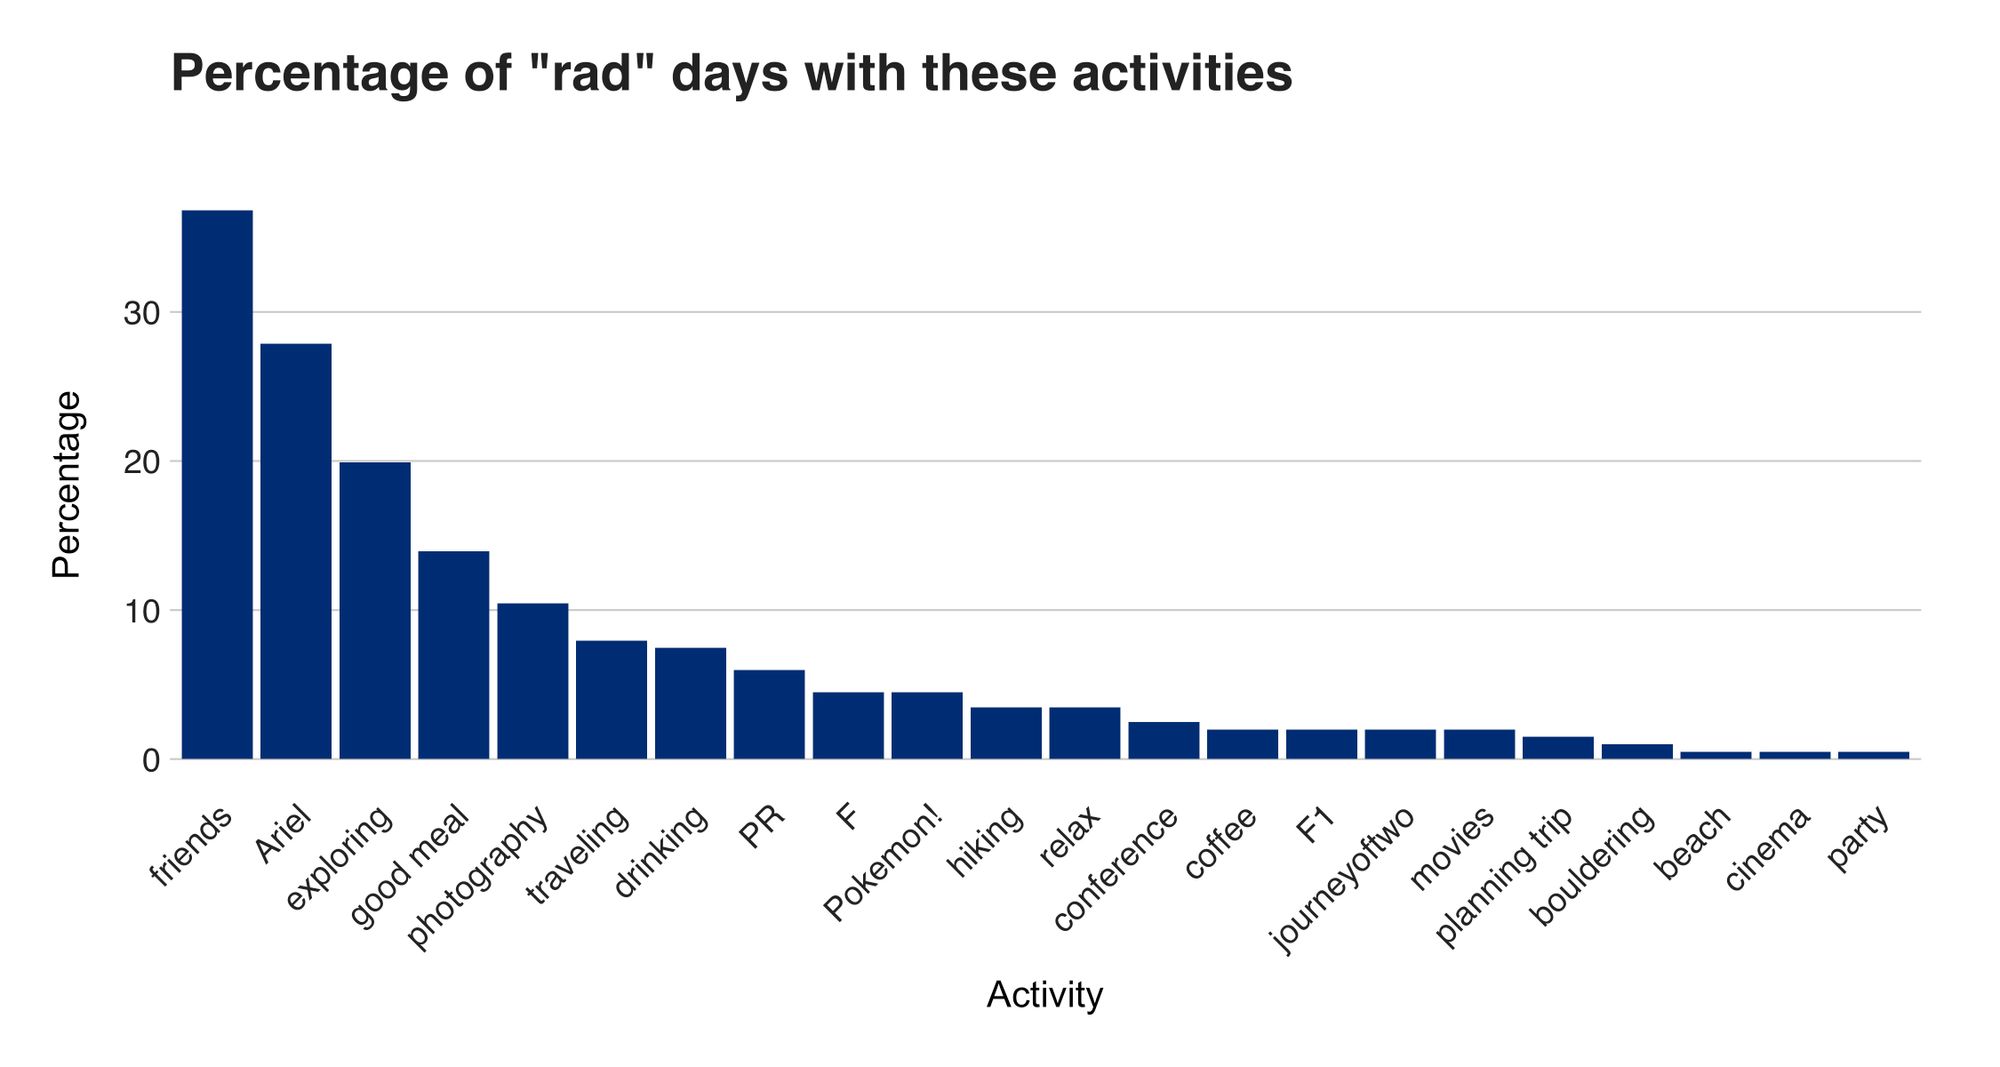 Figure 15: Percentage of "rad" days with these activities.